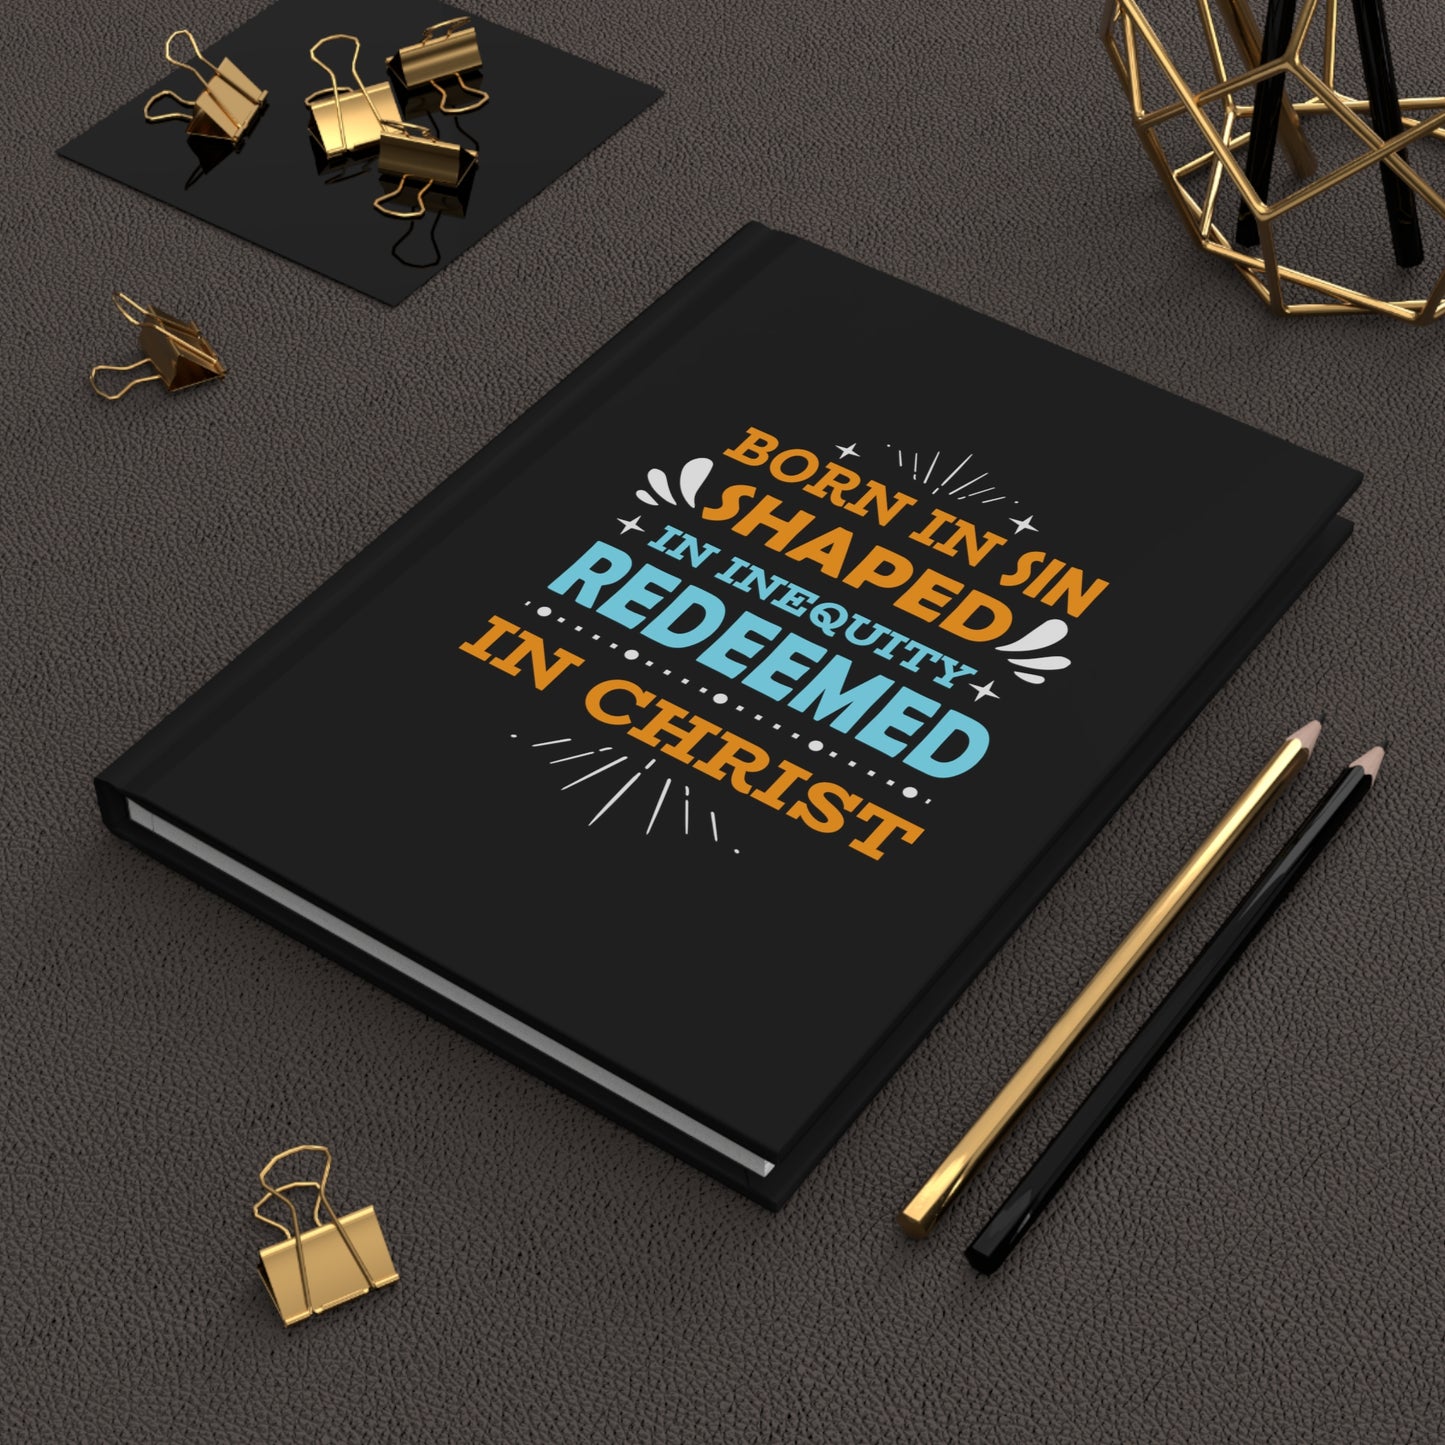 Born In Sin Shaped In Inequity Redeemed In Christ Hardcover Journal Matte